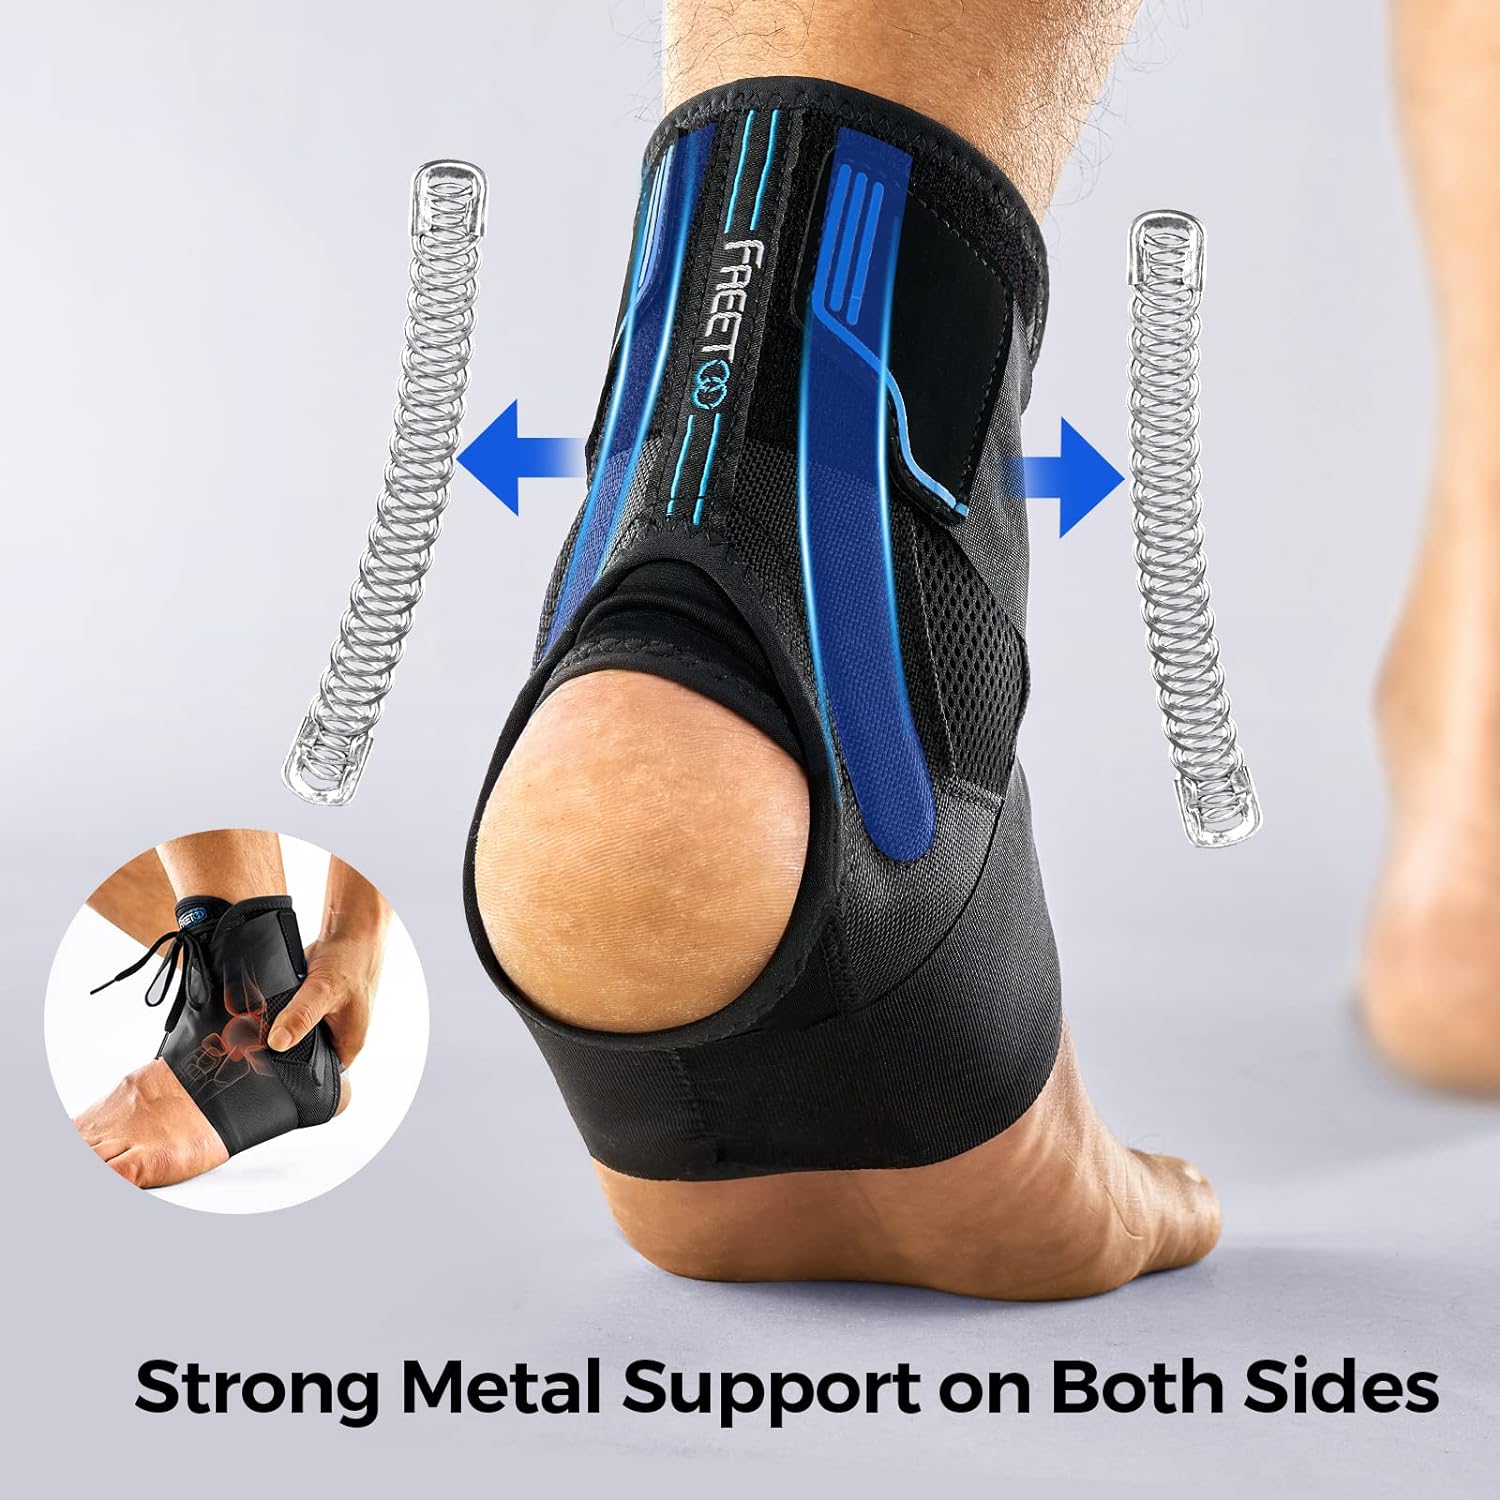 FREETOO Ankle Brace Maximum Metal Support for Men  Women, Compression Foot Support for Sprained Ankle, Plantar Fasciitis,Injury Recovery, Lace up Ankle Support for Running Volleyball Left/Right